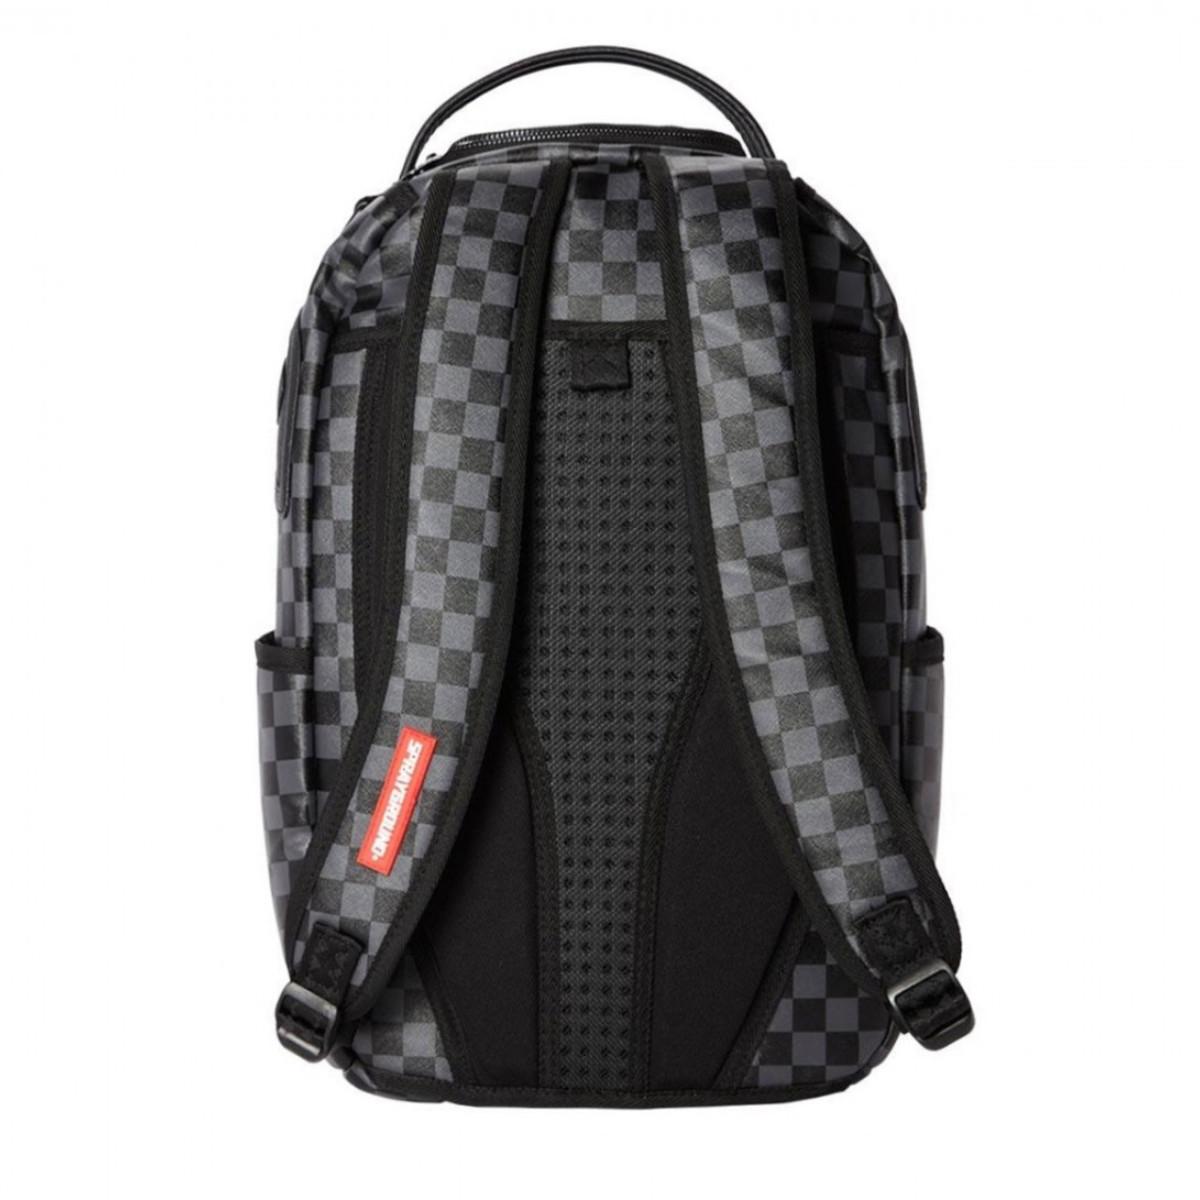 Sprayground Special Ops Checkered Shark Backpack Black Type-613